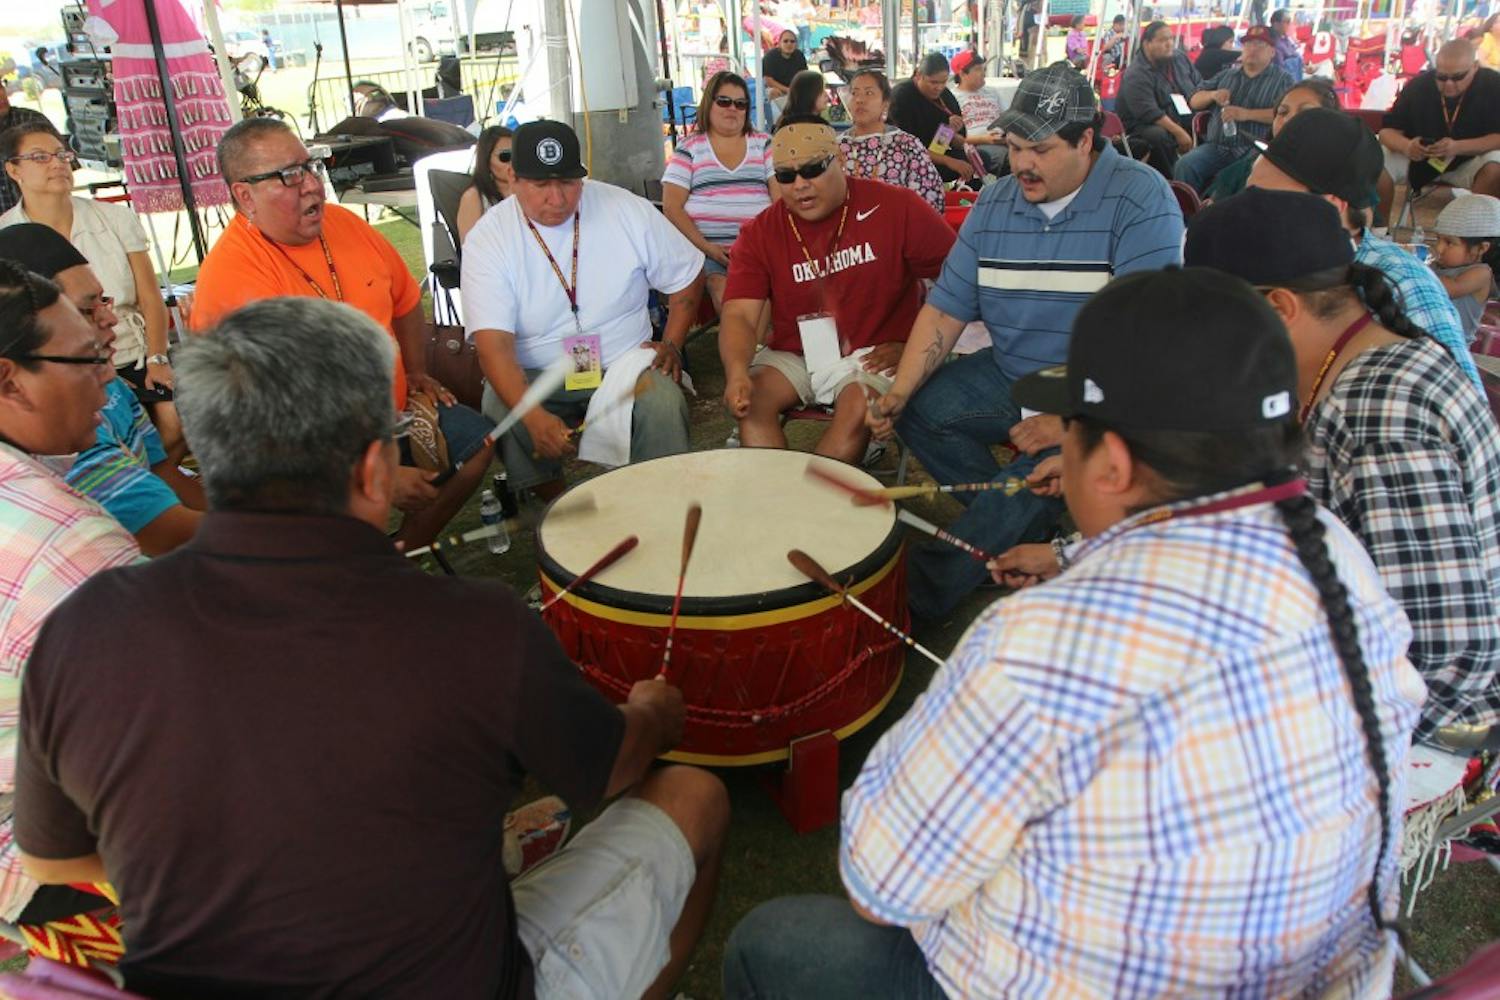 Ritual drummers at ASU’s powwow event beat rhythmically as members of various tribes dance to the beat. At ASU, members from over 60 different tribes attend classes. (Photo By Dominic Valente)